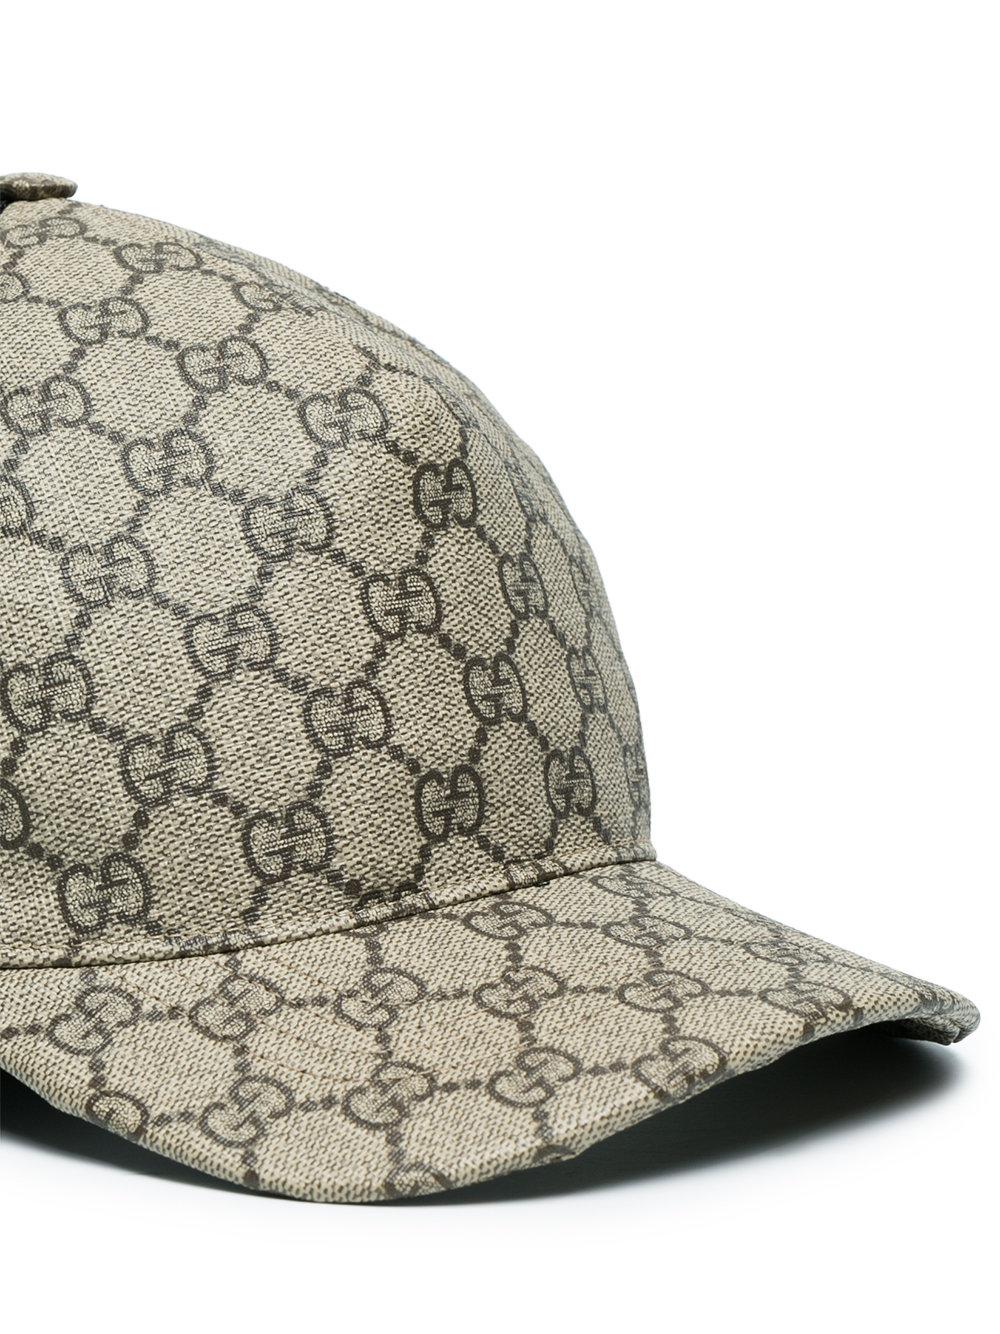 Gucci Cotton GG Supreme Baseball Hat in Brown for -